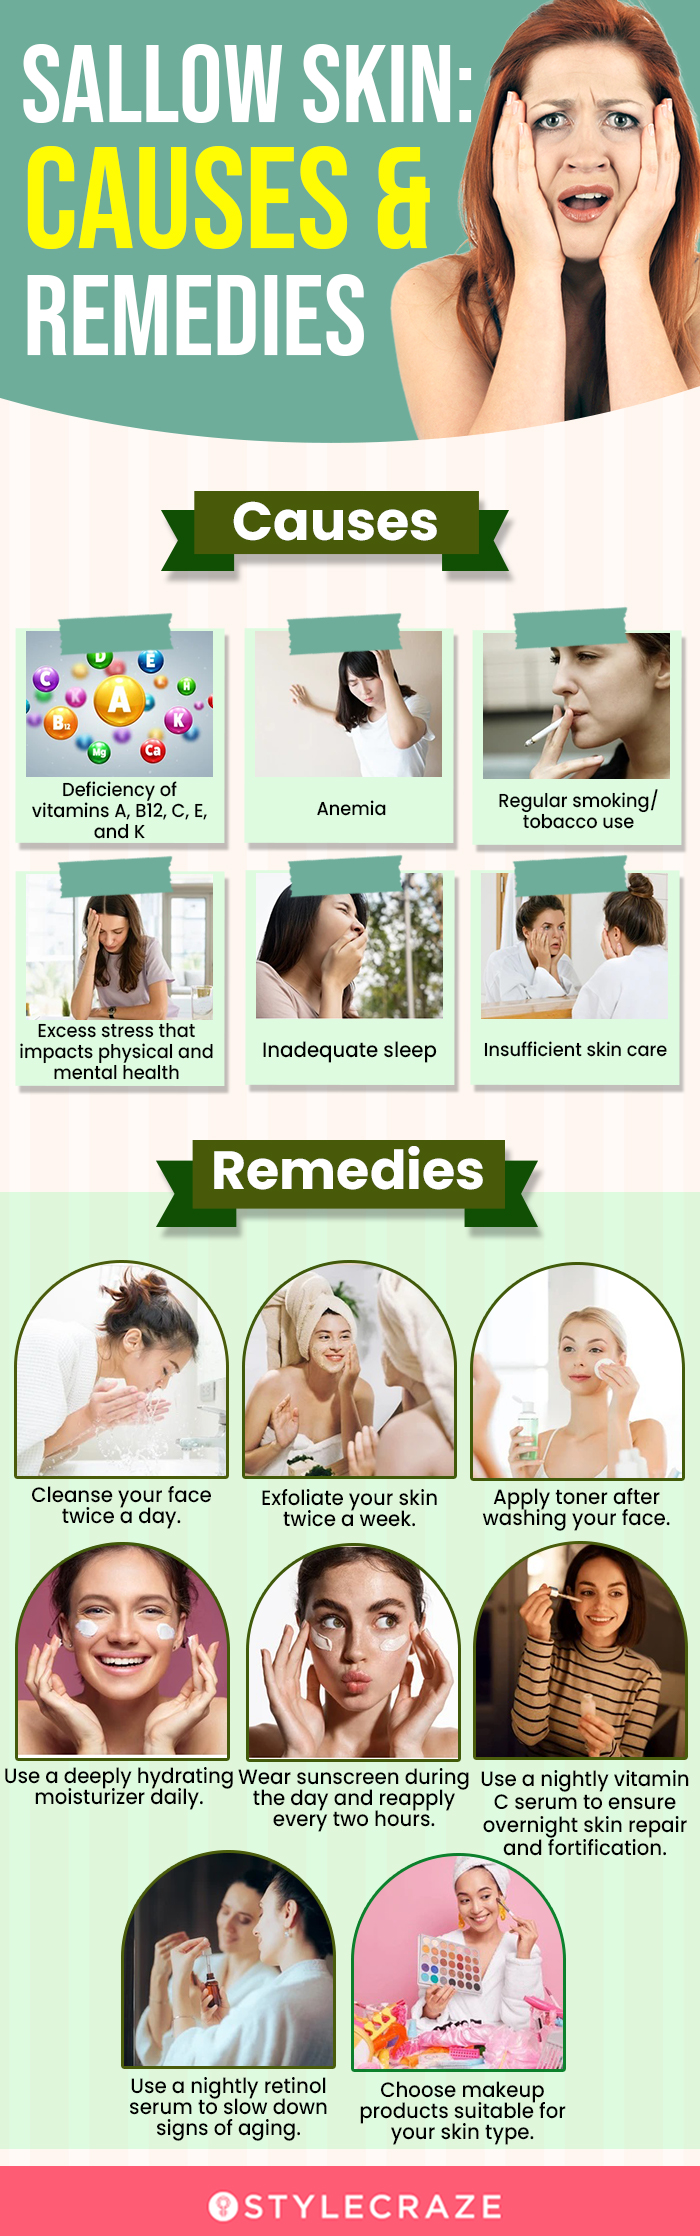 sallow skin causes & remedies (infographic)